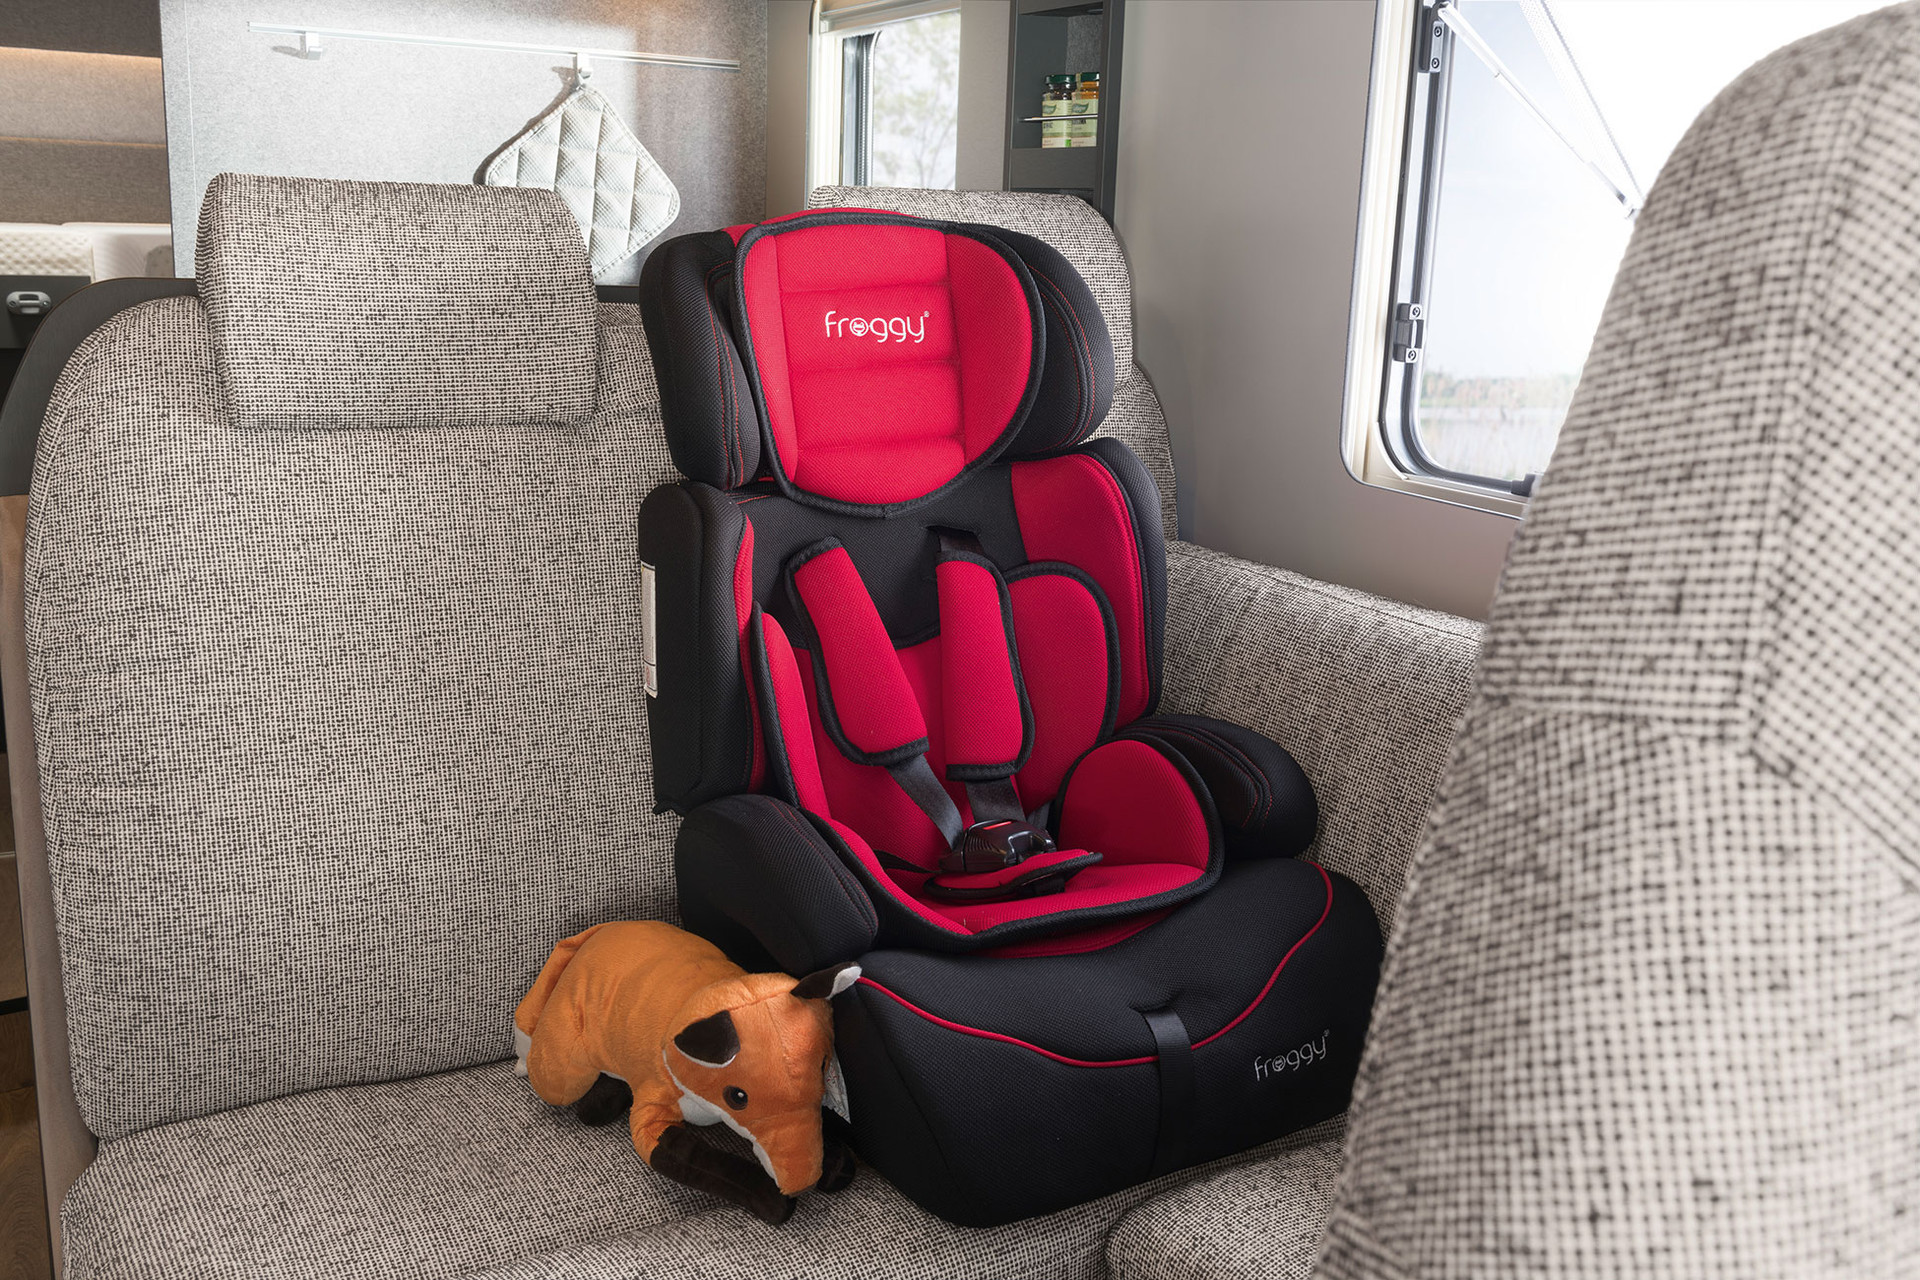 On request, the Isofix system can be installed for safe attachment of child seats. It is fitted as standard on the EBL and DBL models.